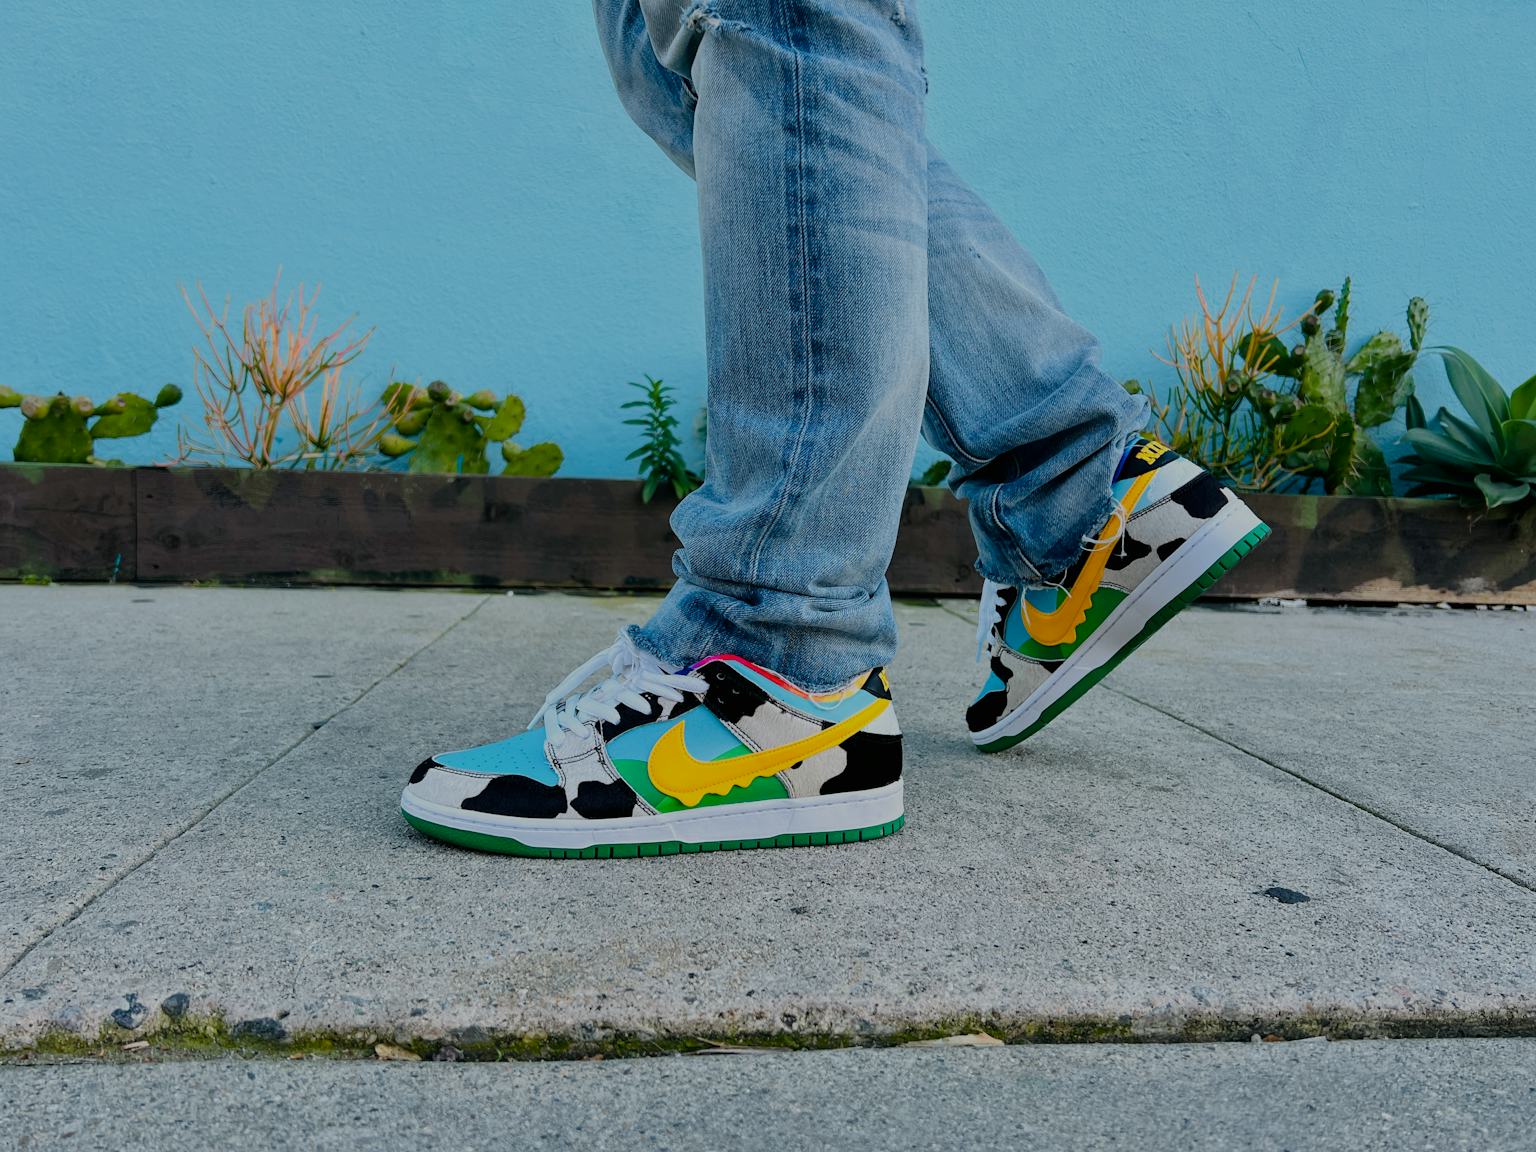 Wearing Nike's SB Dunk Low 'Chunky Dunky': Wildest sneaker ever?